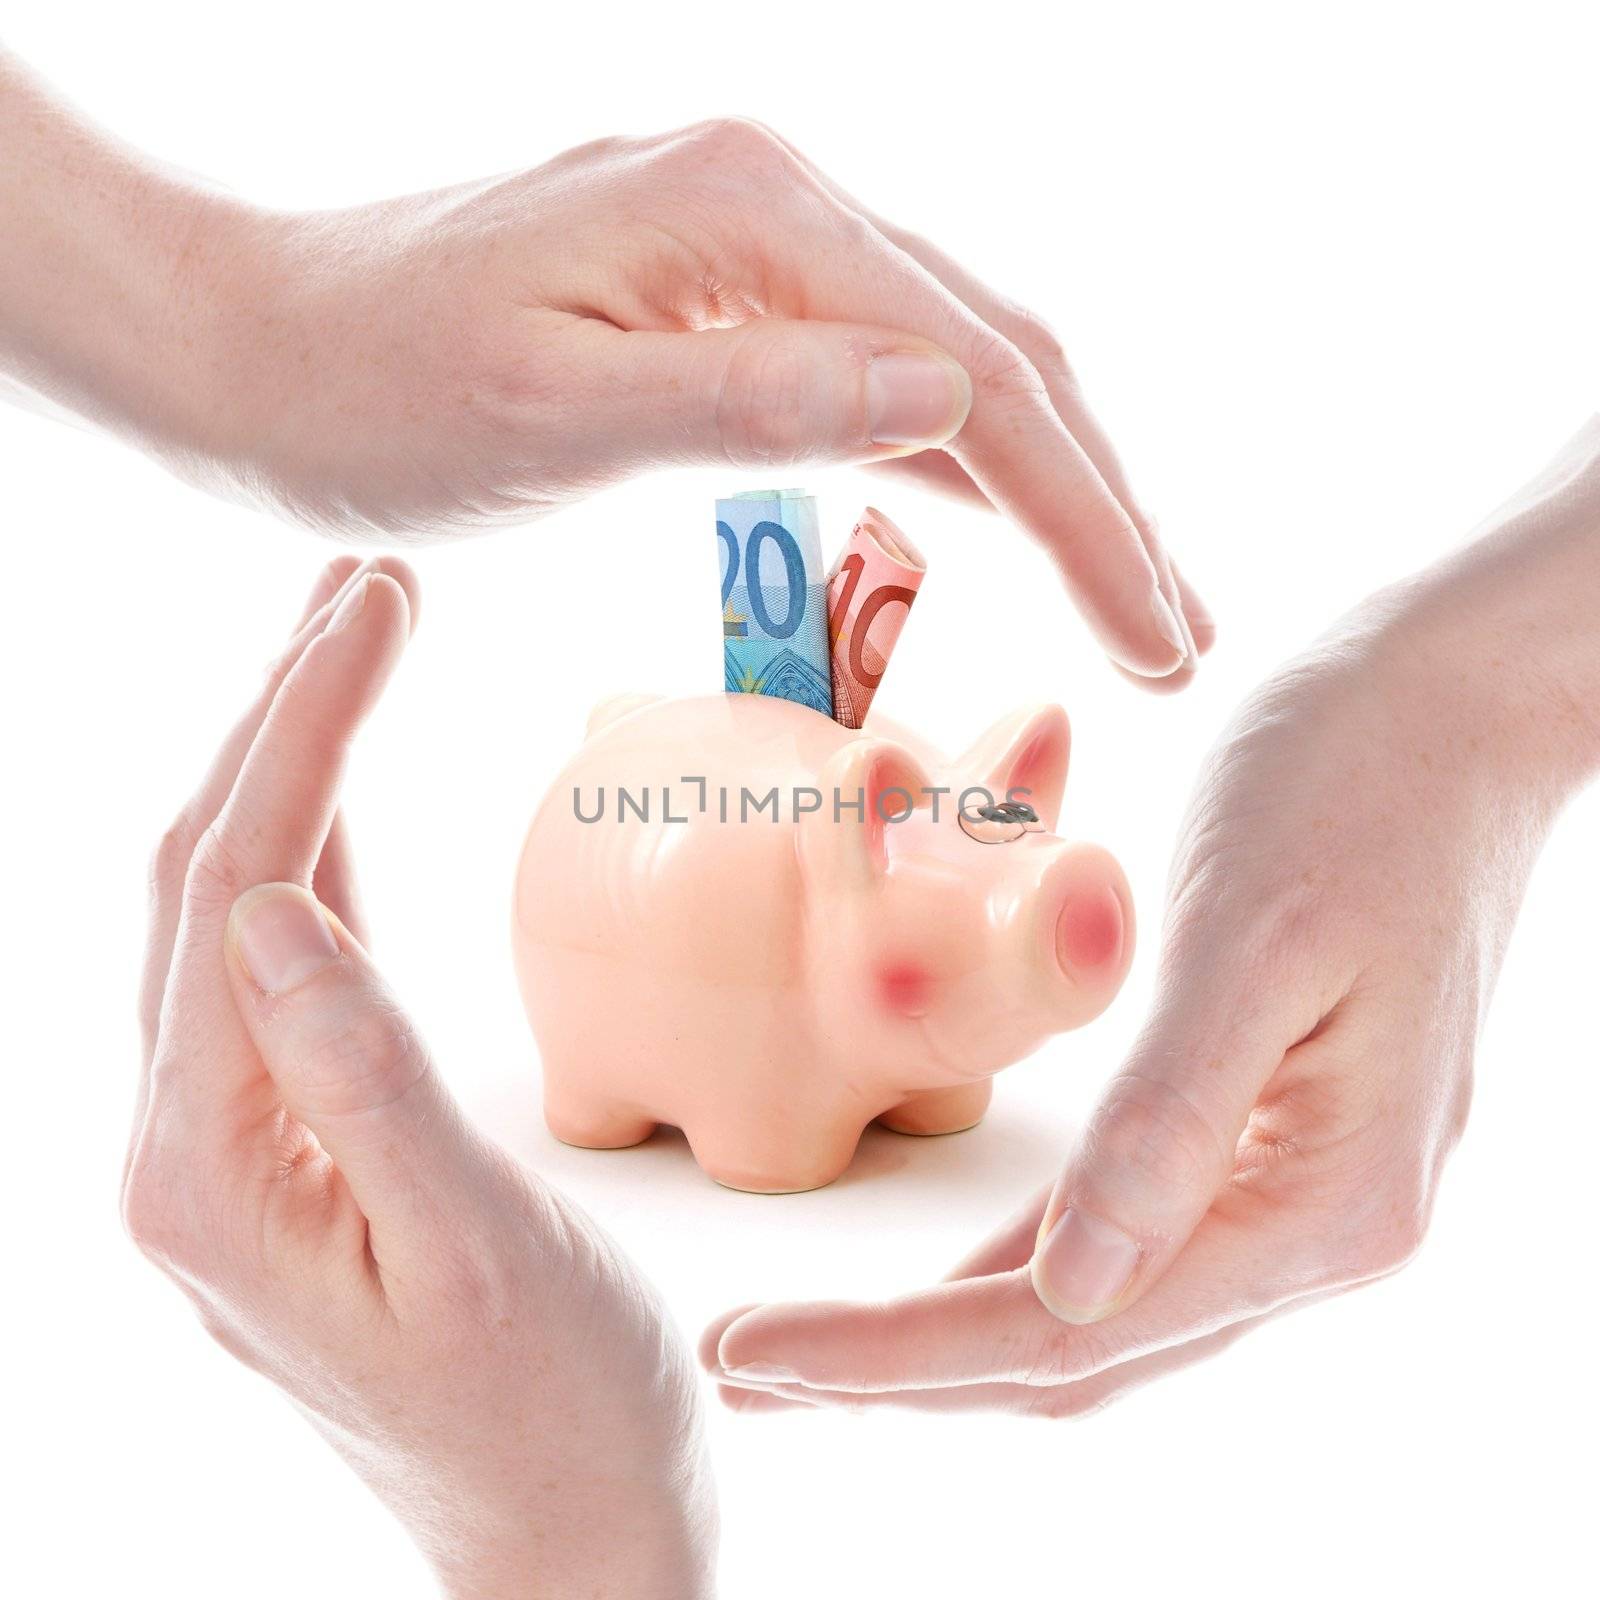 piggy bank and hand isolated on white background showing savings concept